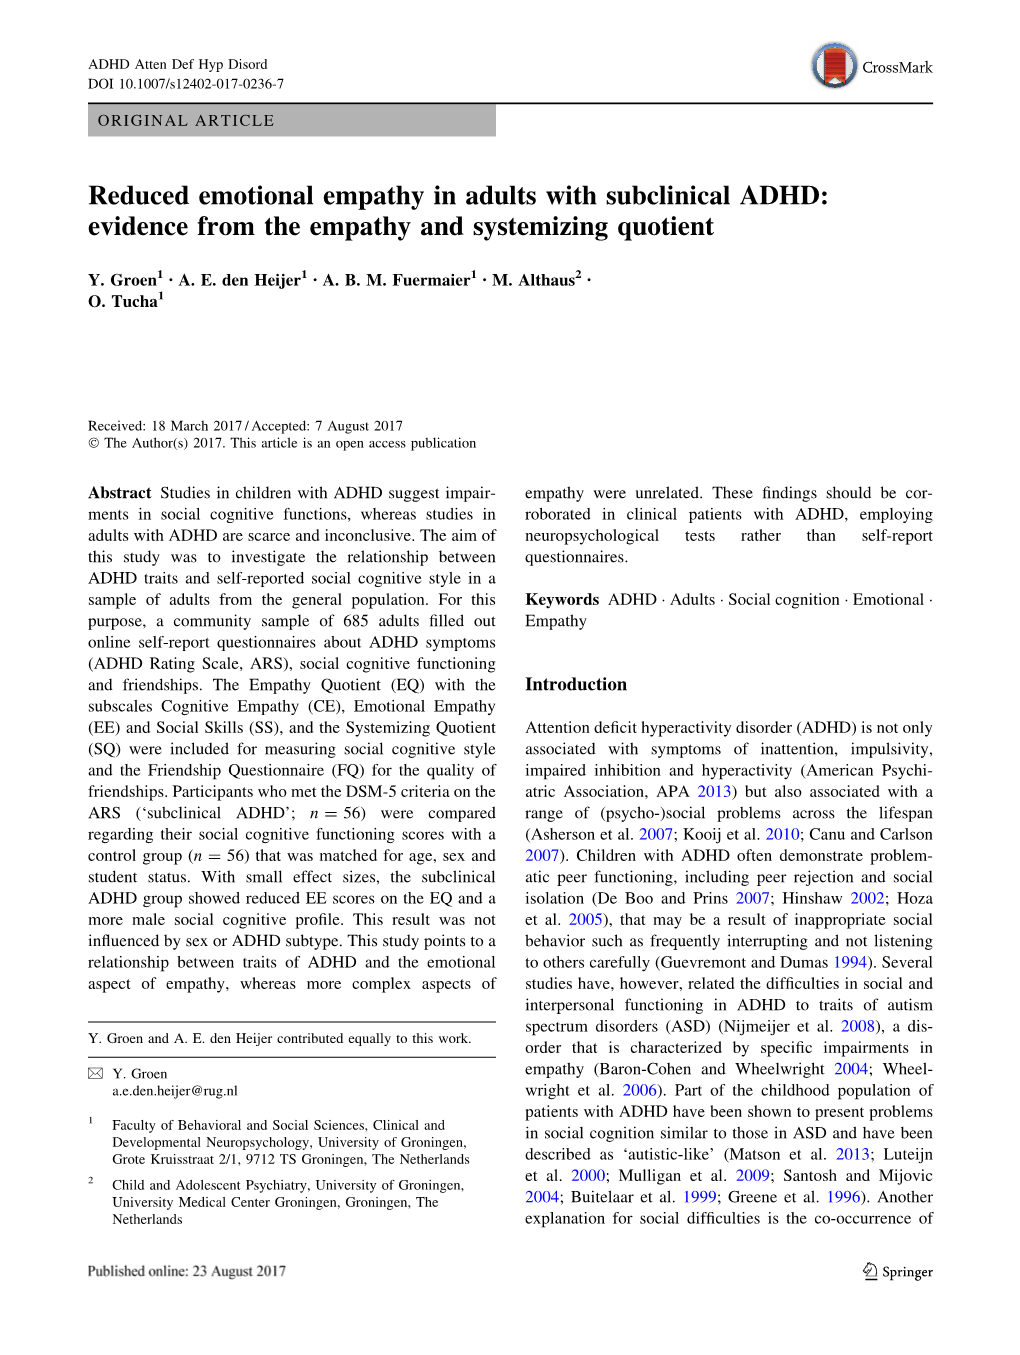 Reduced Emotional Empathy in Adults with Subclinical ADHD: Evidence from the Empathy and Systemizing Quotient